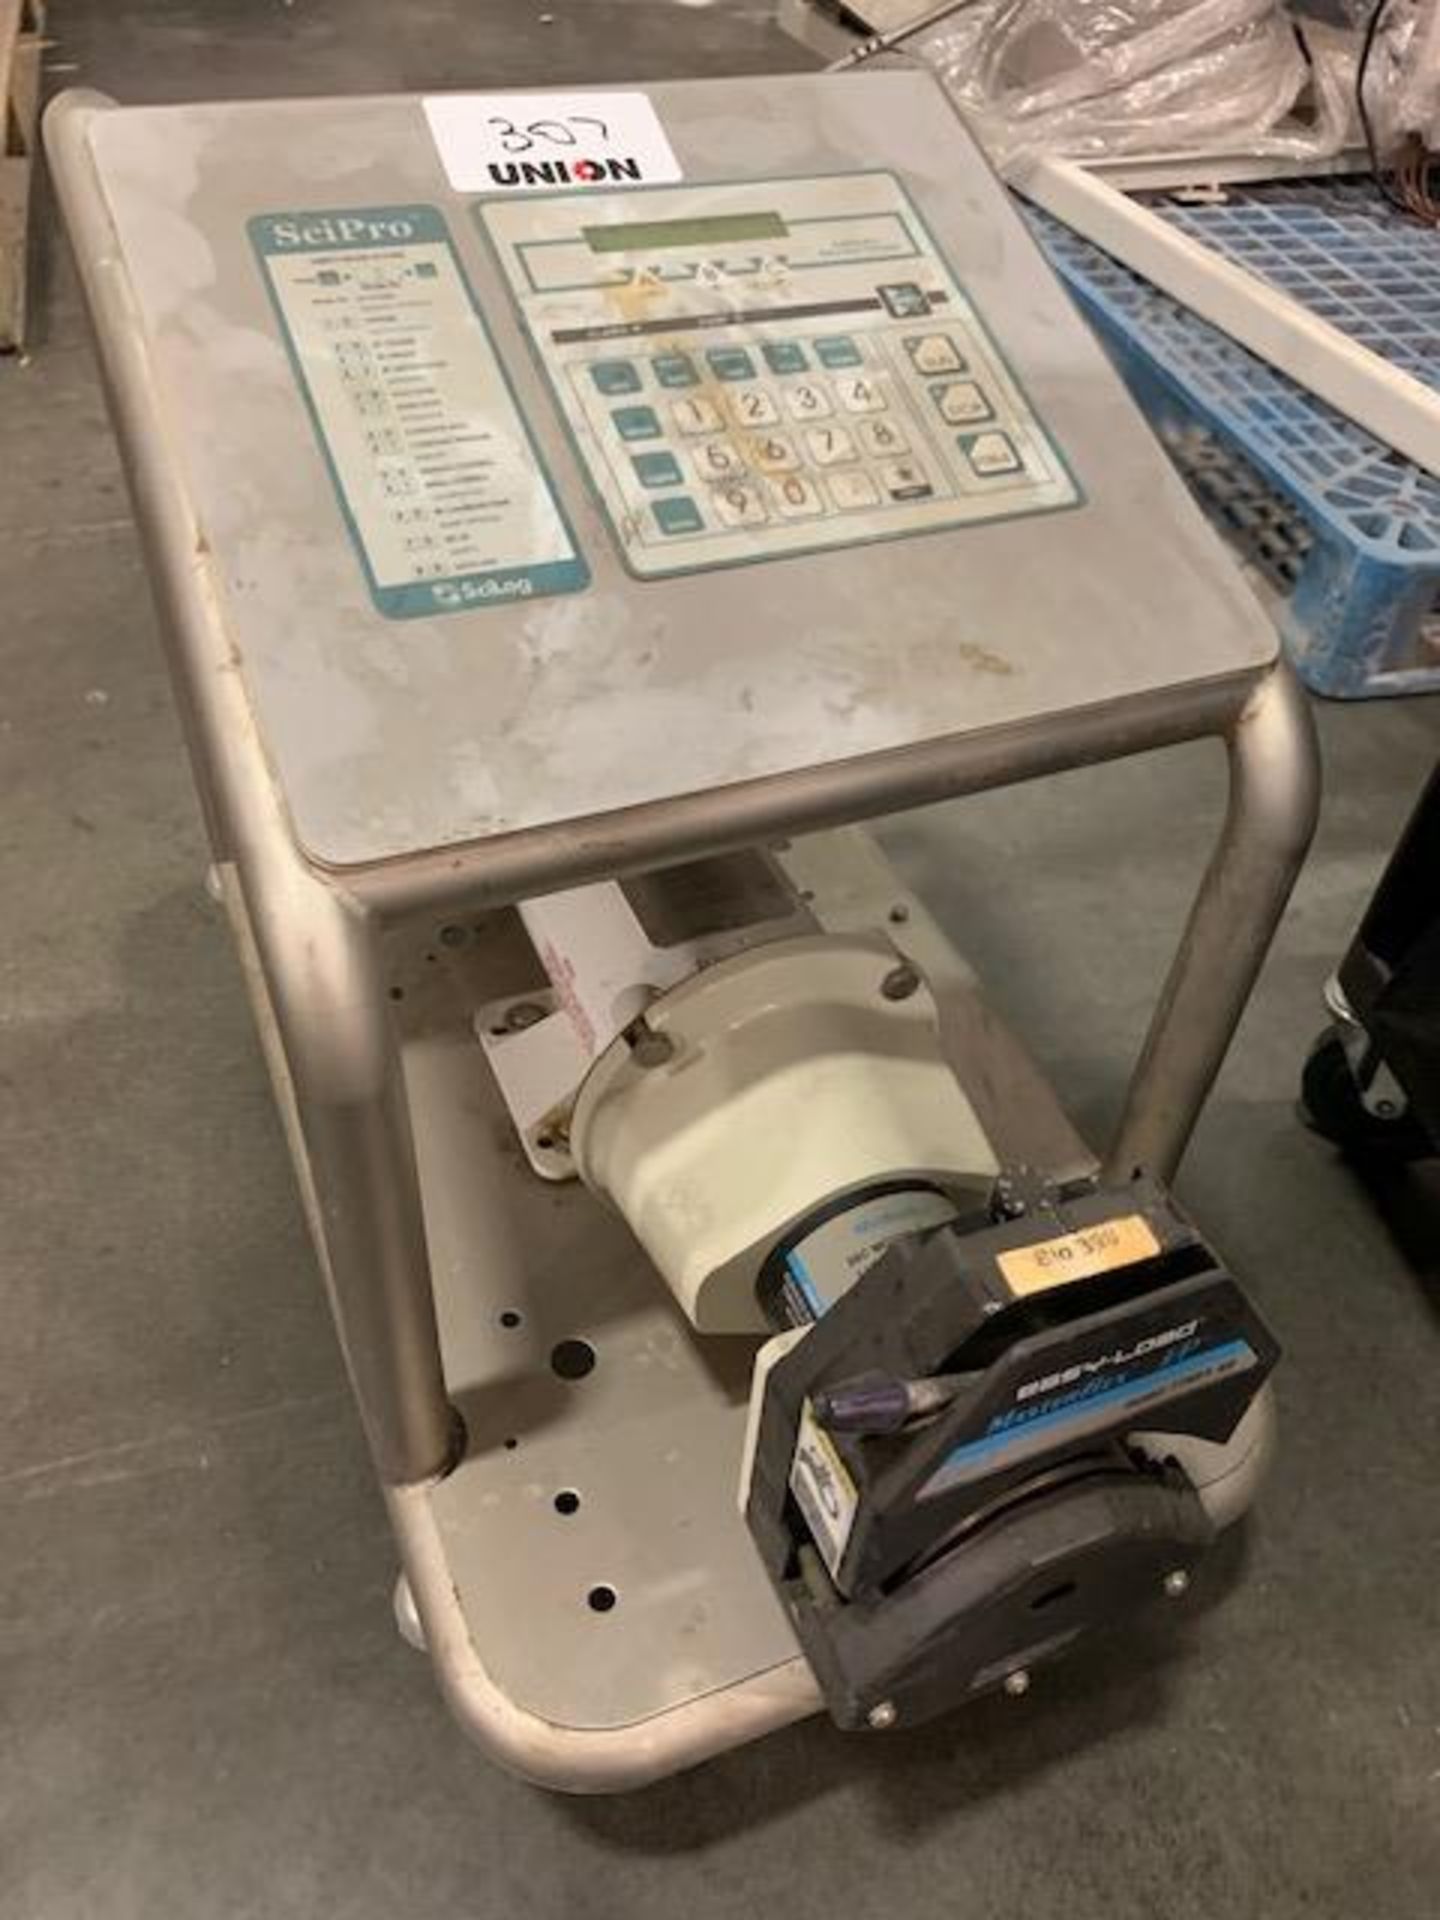 Masterflex Easy Load I/P Peristaltic Pump with SciPro controller on Stainless steel portable cart.